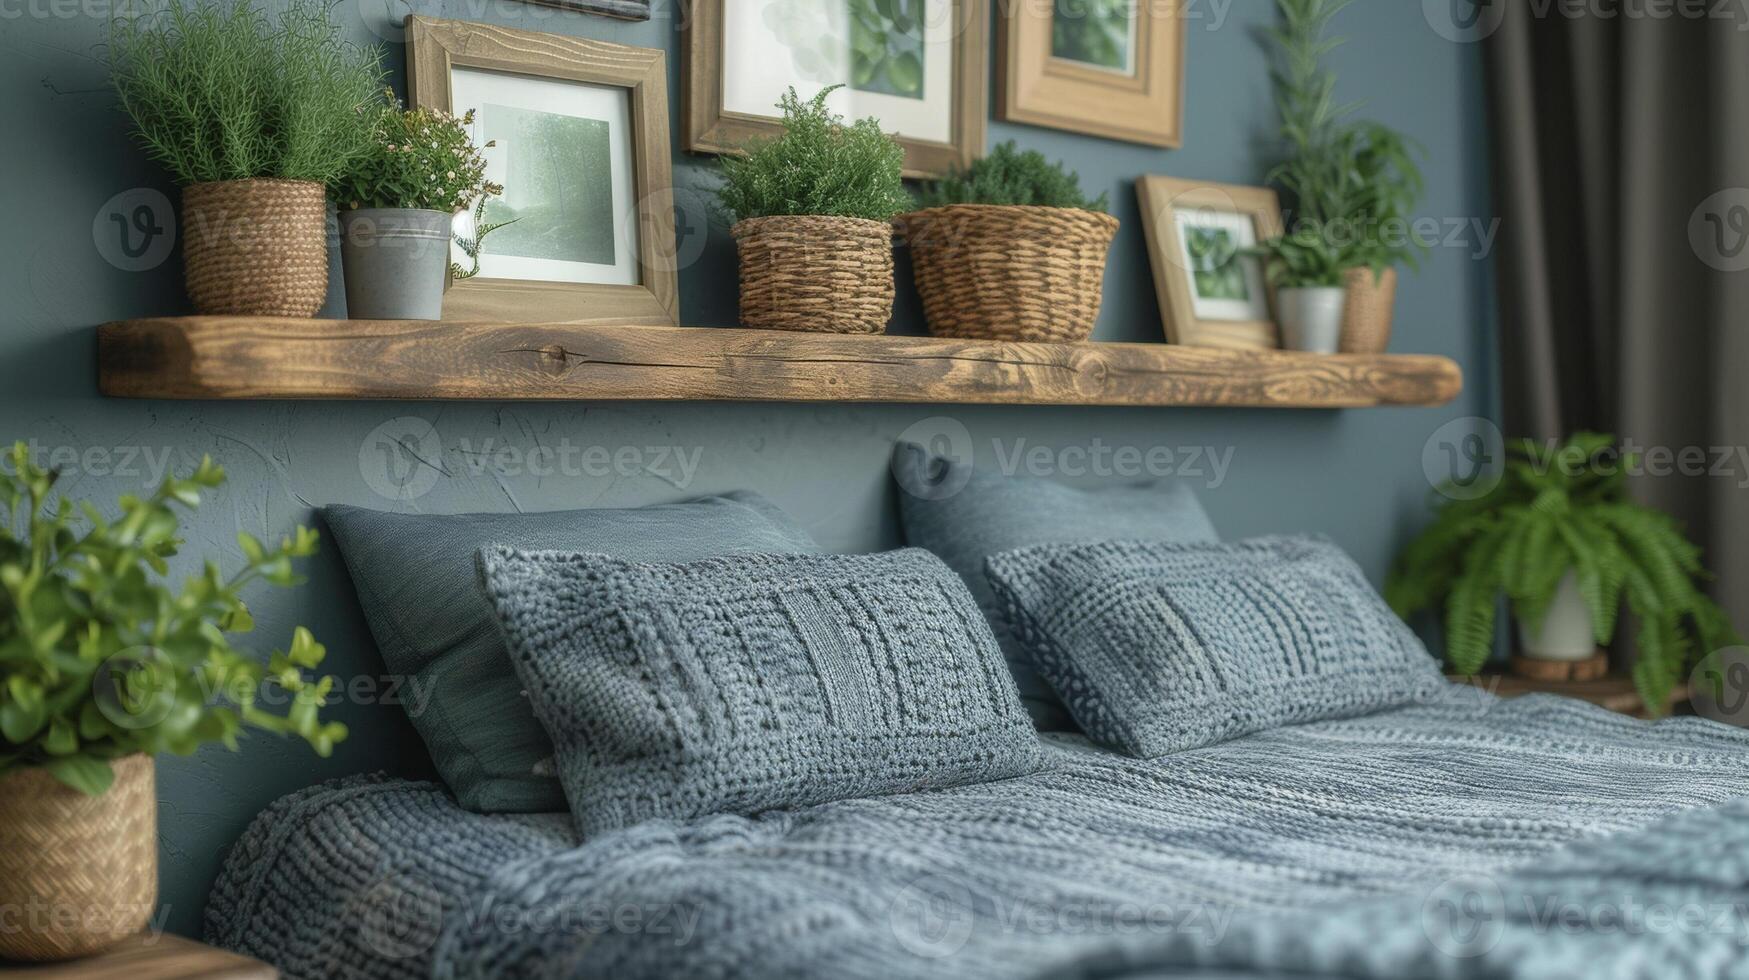 A side view of a rustic wooden custom shelving unit in a cozy bedroom with woven baskets framed photos and plants adding a personal touch to the display